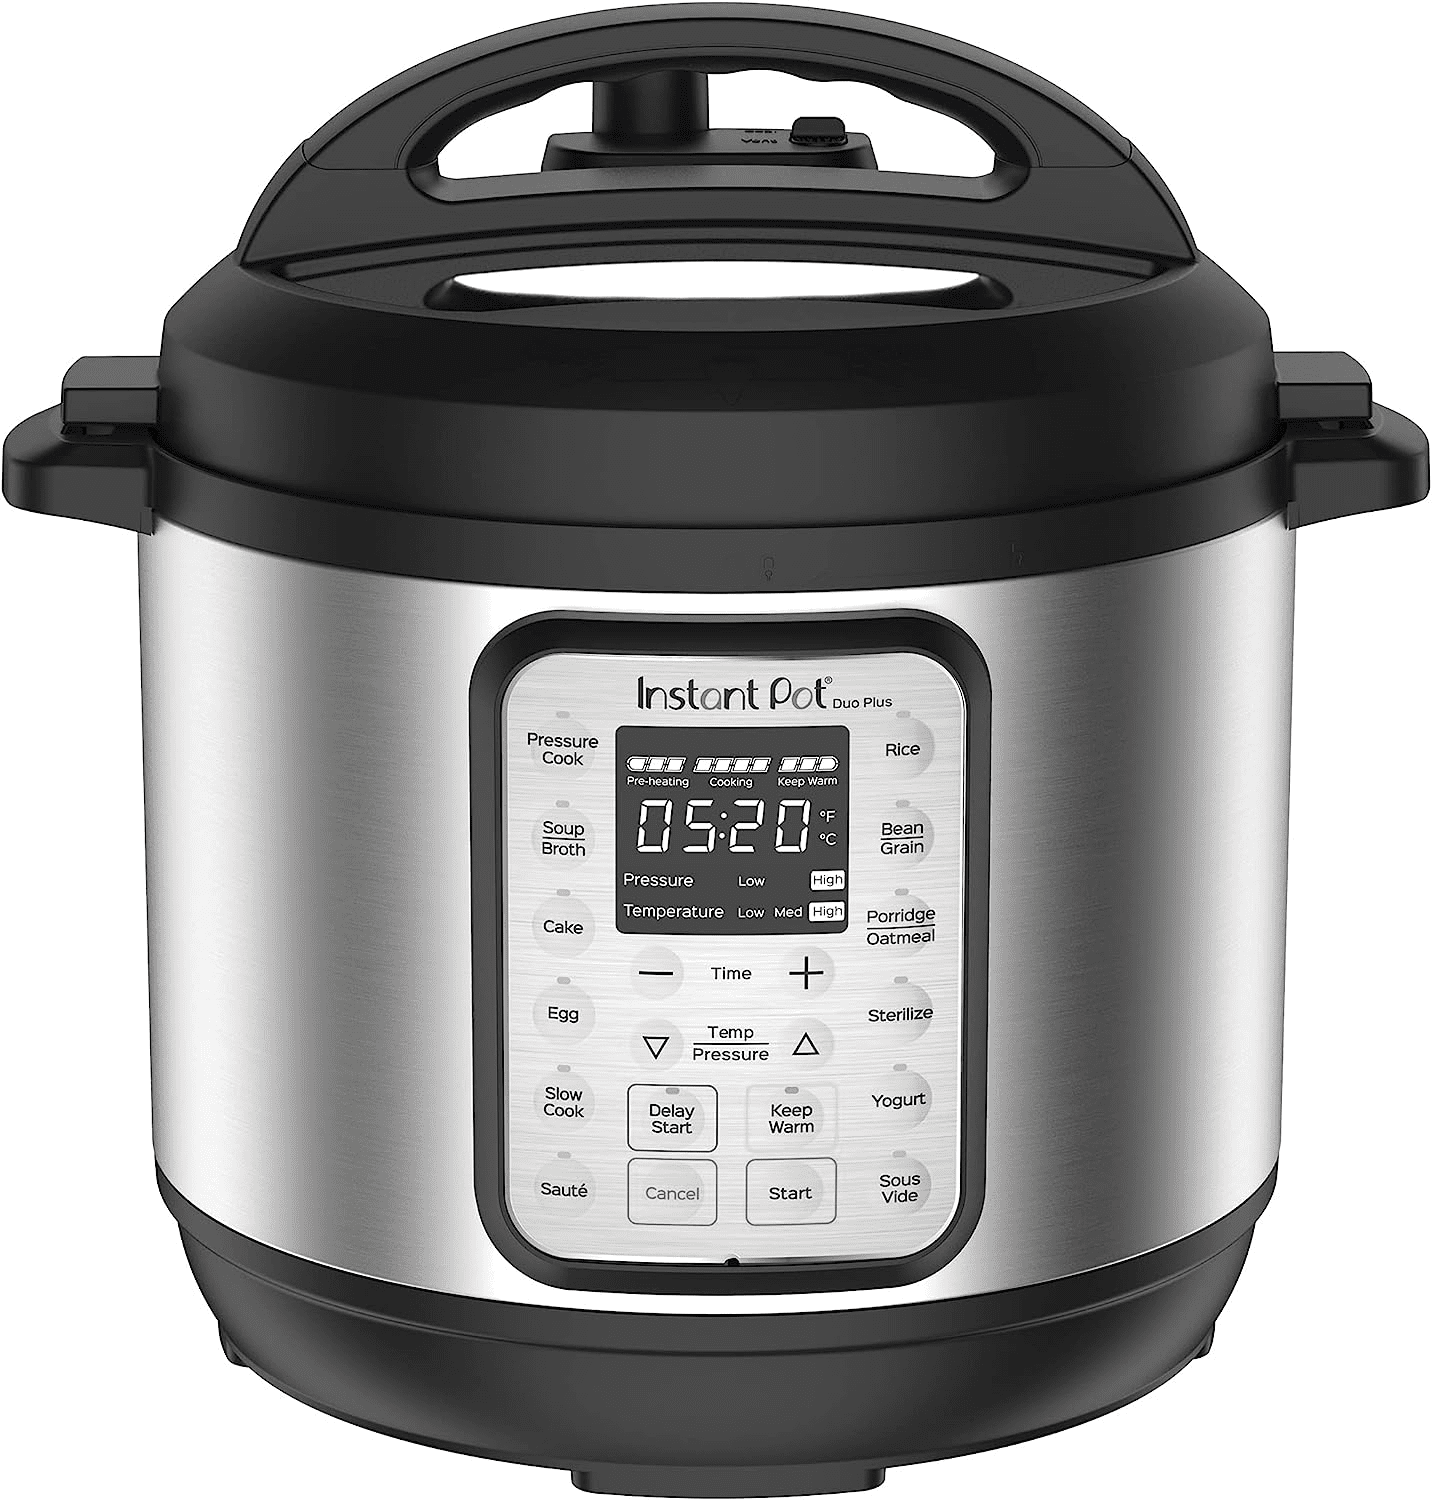 Instant Pot 6 qt. Stainless Steel Duo Crisp Electric Pressure Cooker  112-0120-01 - The Home Depot